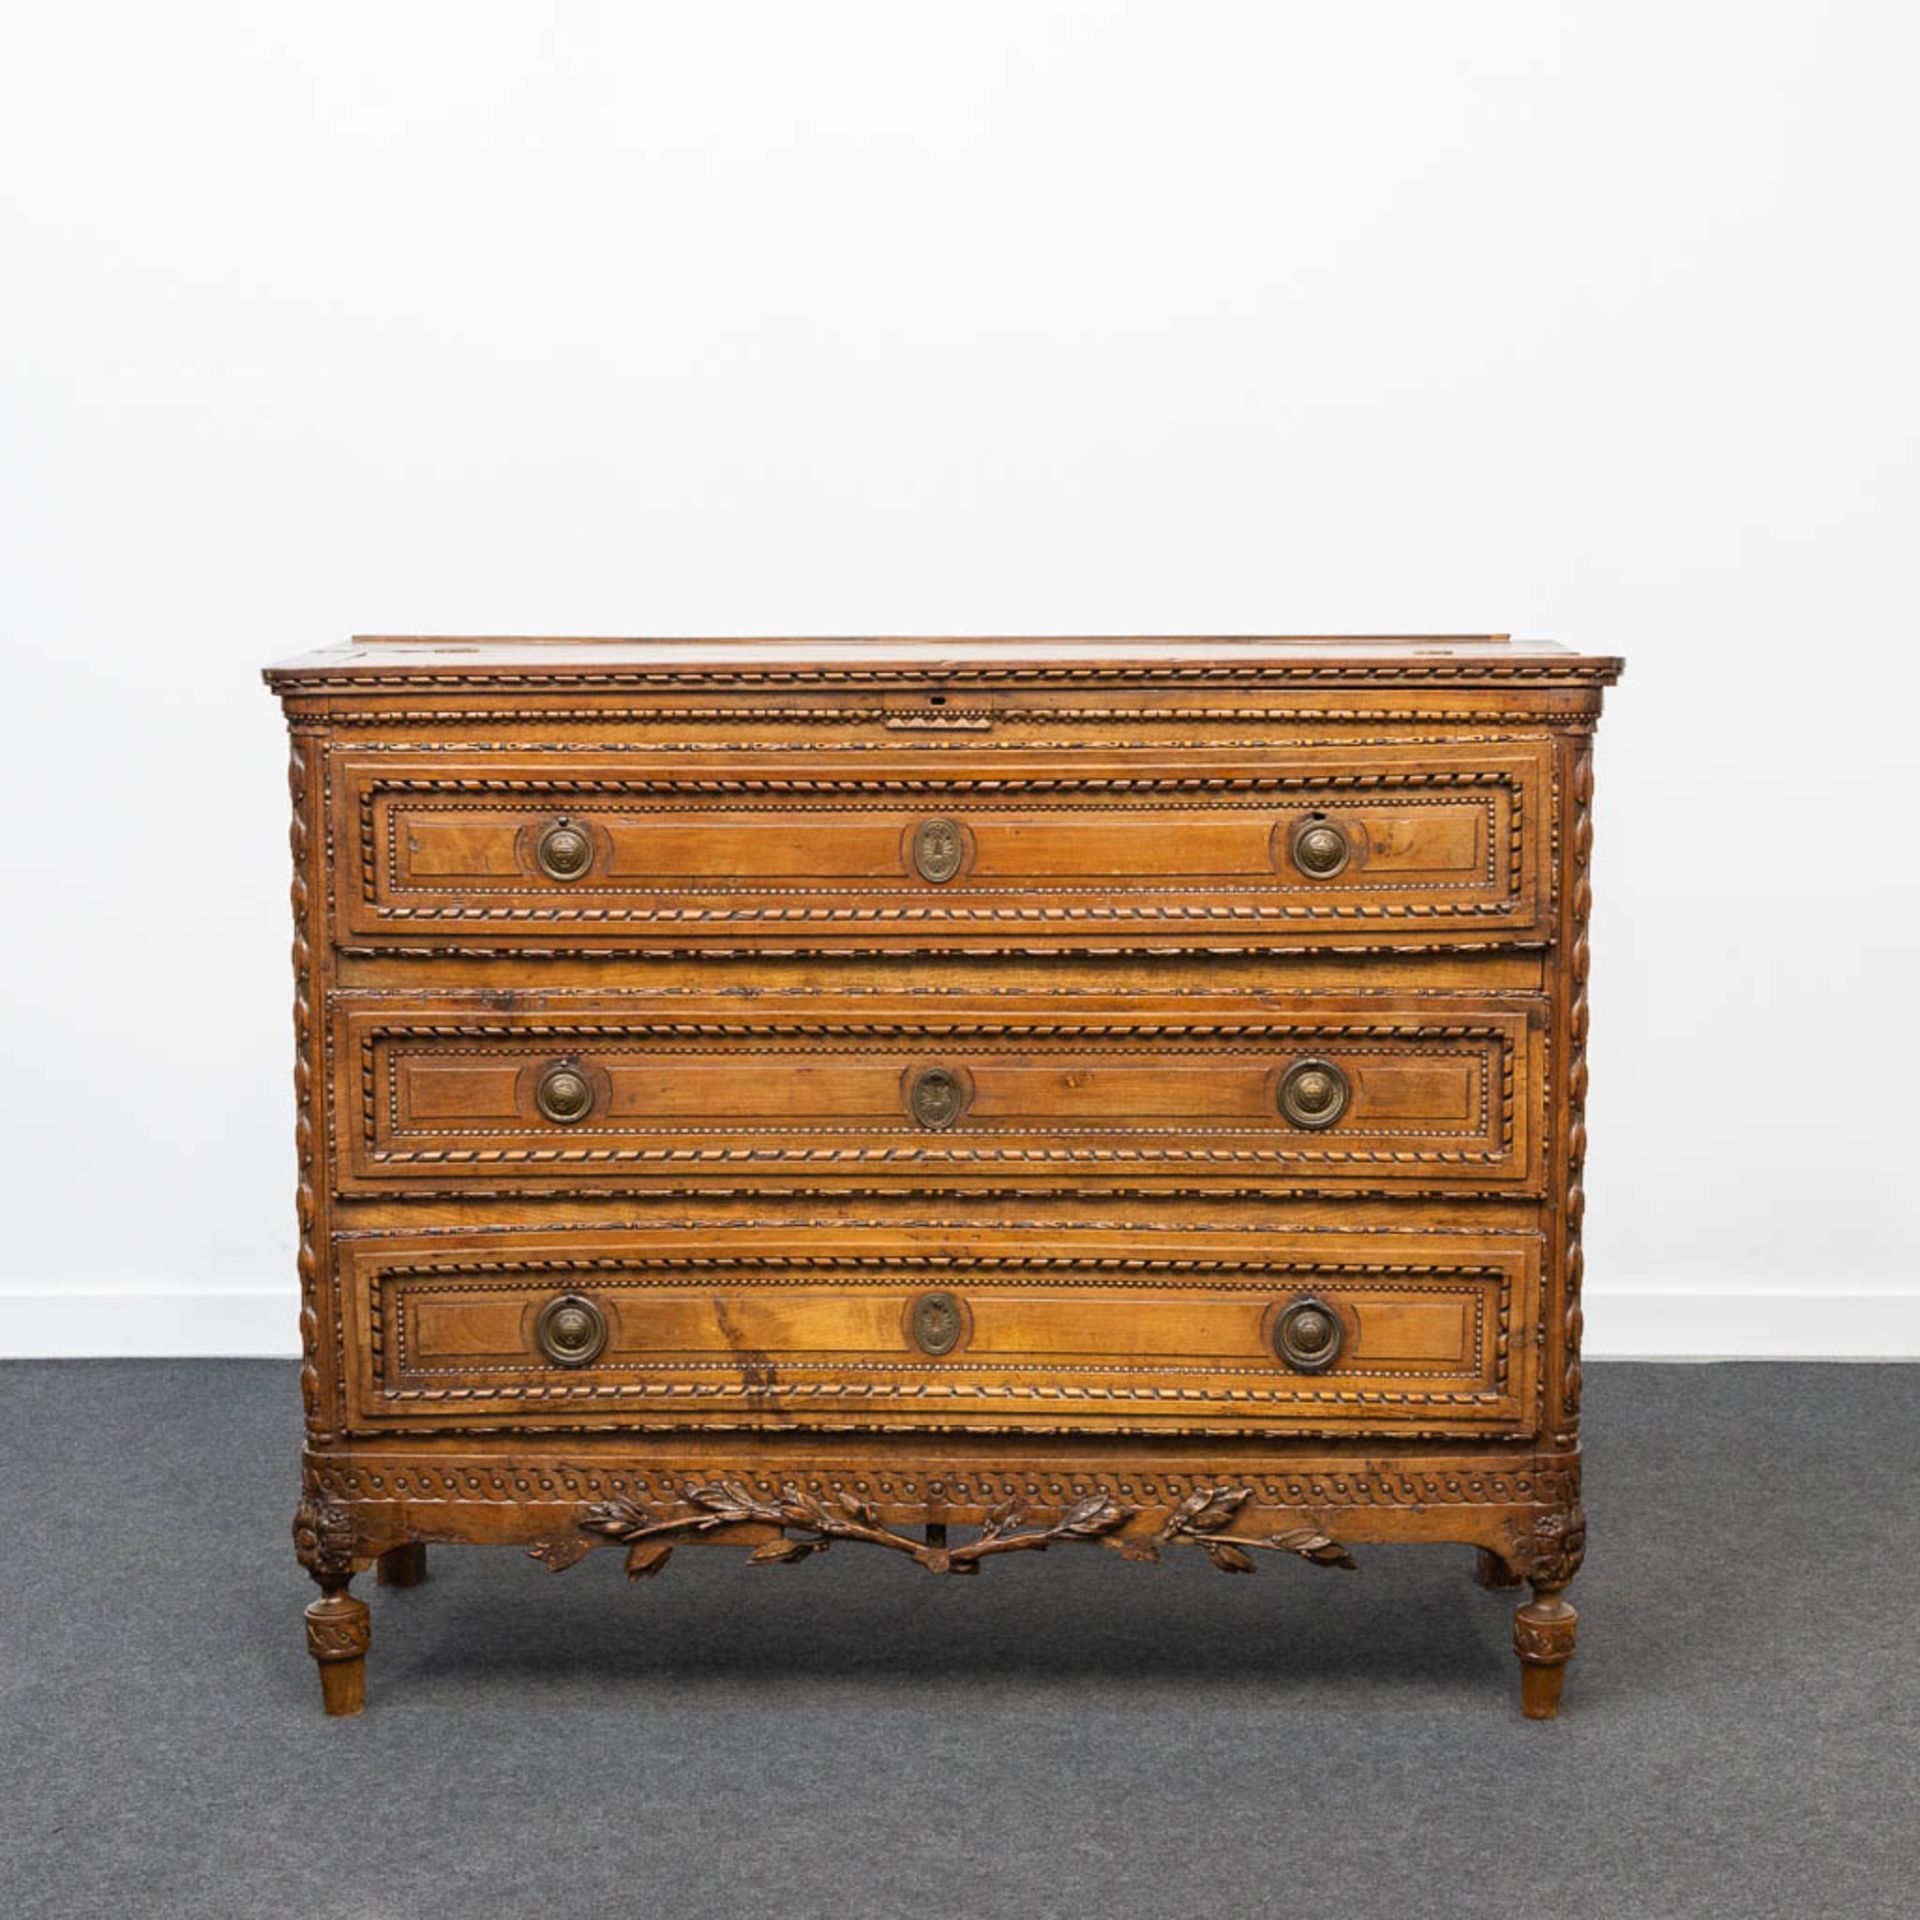 A wood sculptured commode in Louis XVI style, with 3 drawers and a hidden desk. 18th century.